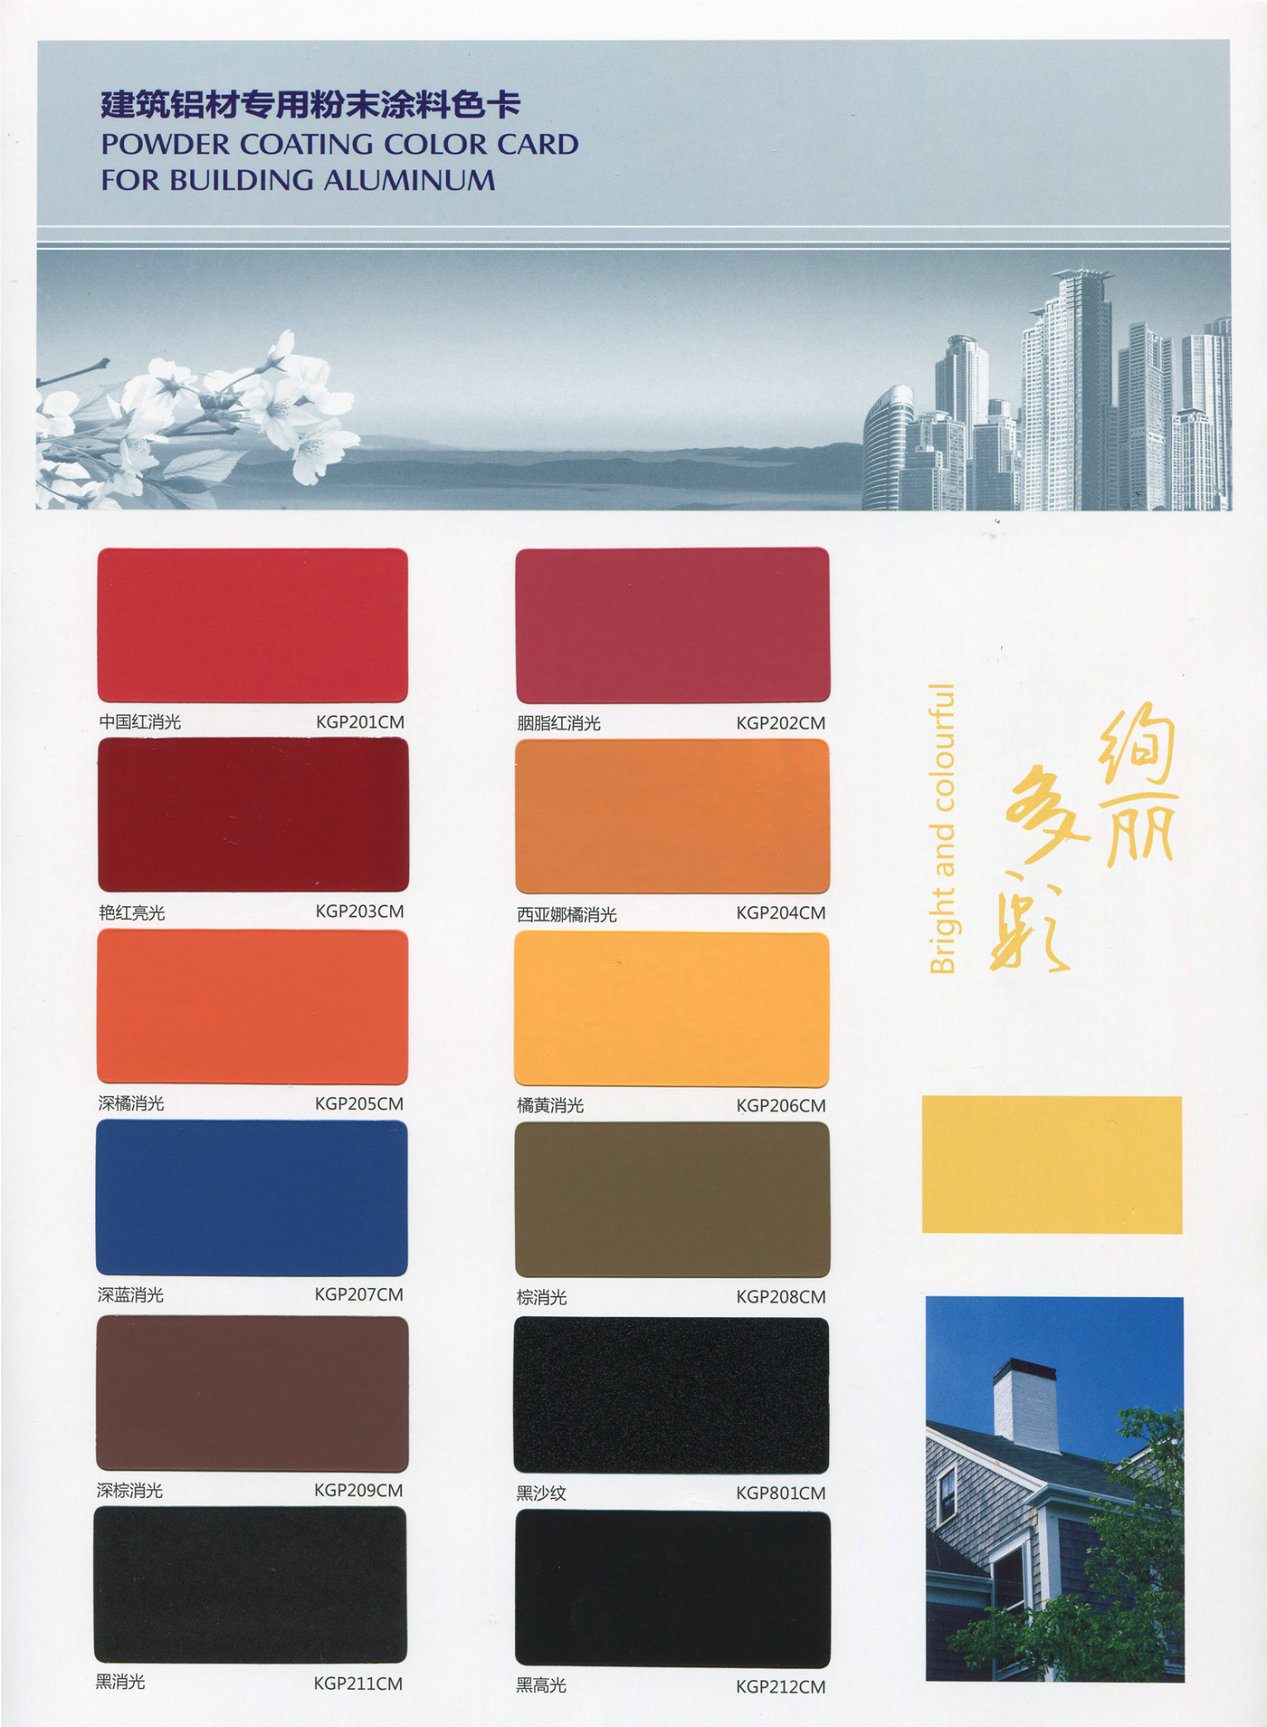 Powder coatings for building materials produced color atlas(3)